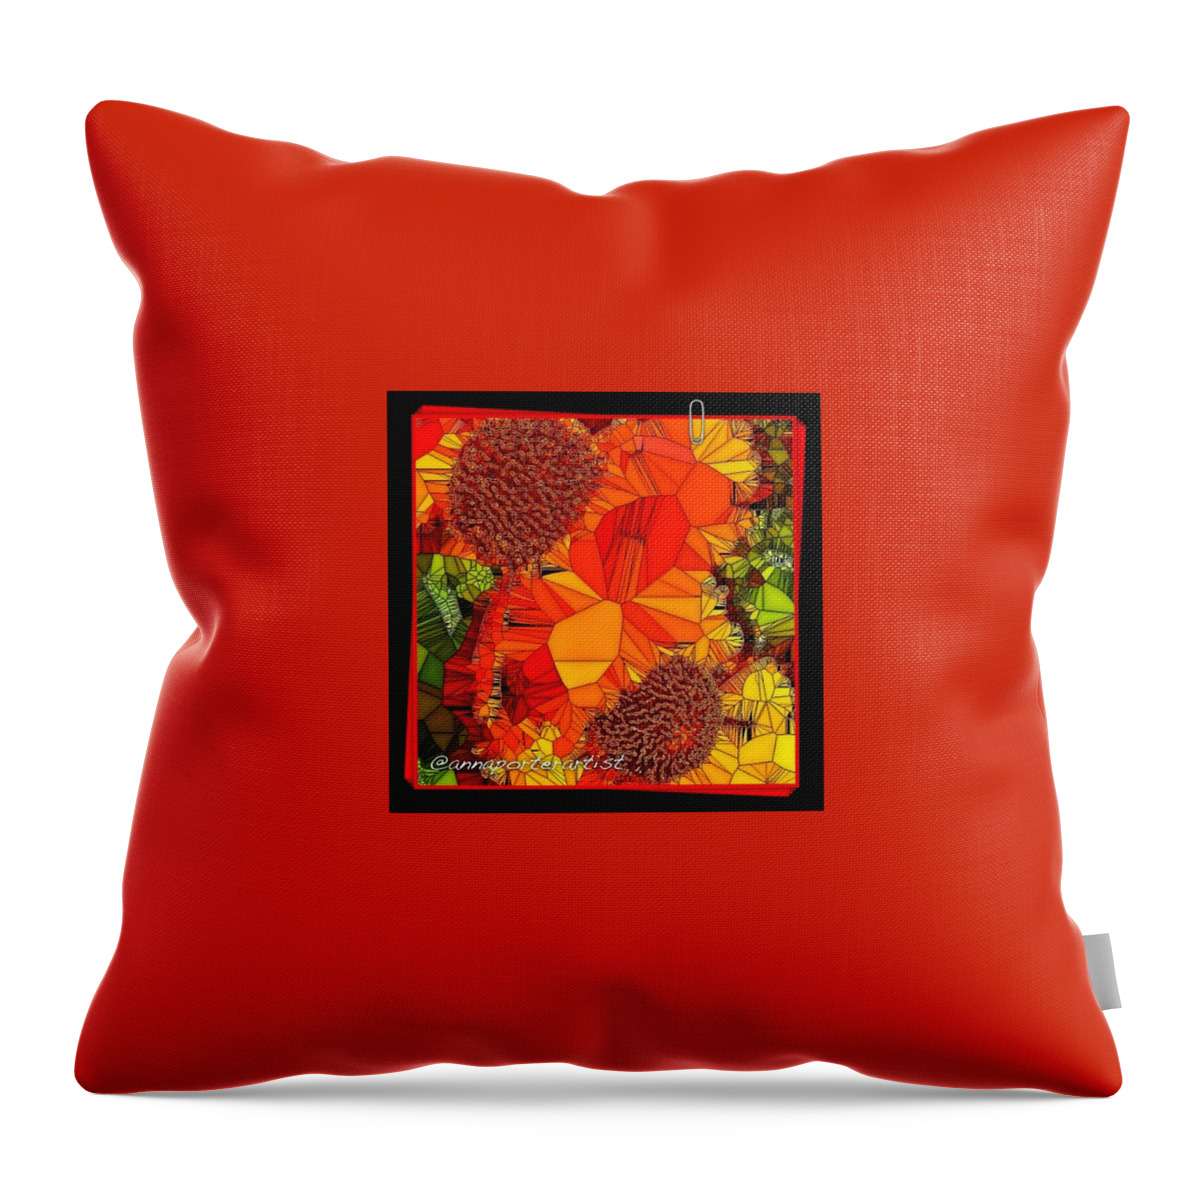 Flowersofinstagram Throw Pillow featuring the photograph Fractals, A Digital Painting By by Anna Porter